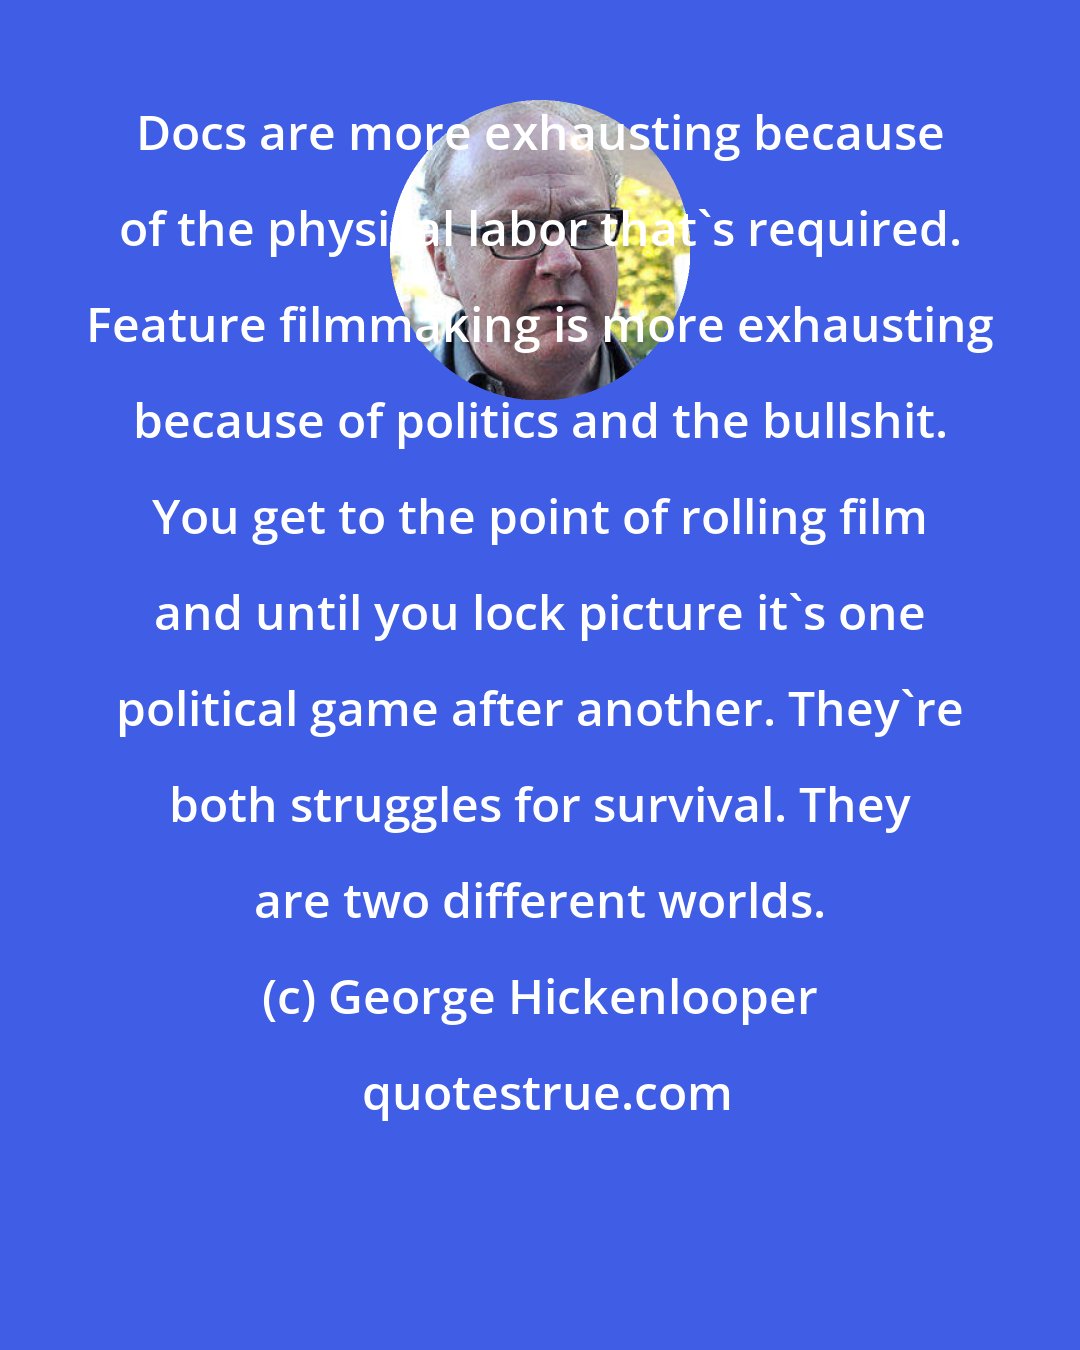 George Hickenlooper: Docs are more exhausting because of the physical labor that's required. Feature filmmaking is more exhausting because of politics and the bullshit. You get to the point of rolling film and until you lock picture it's one political game after another. They're both struggles for survival. They are two different worlds.